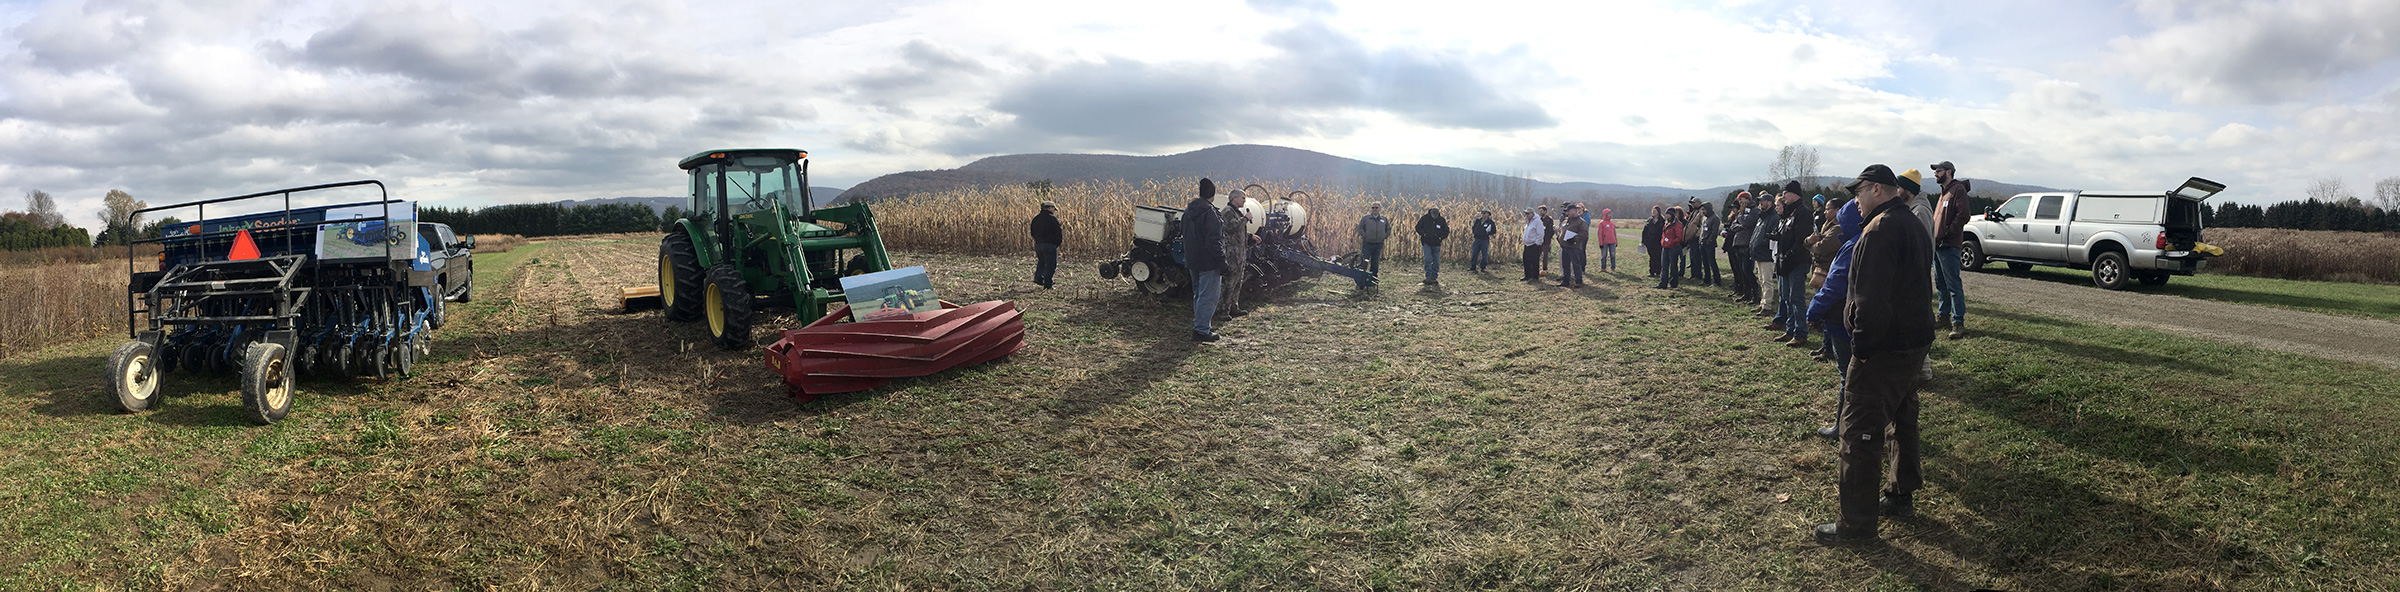 Big Flats field tour at the NECCC Annual Meeting